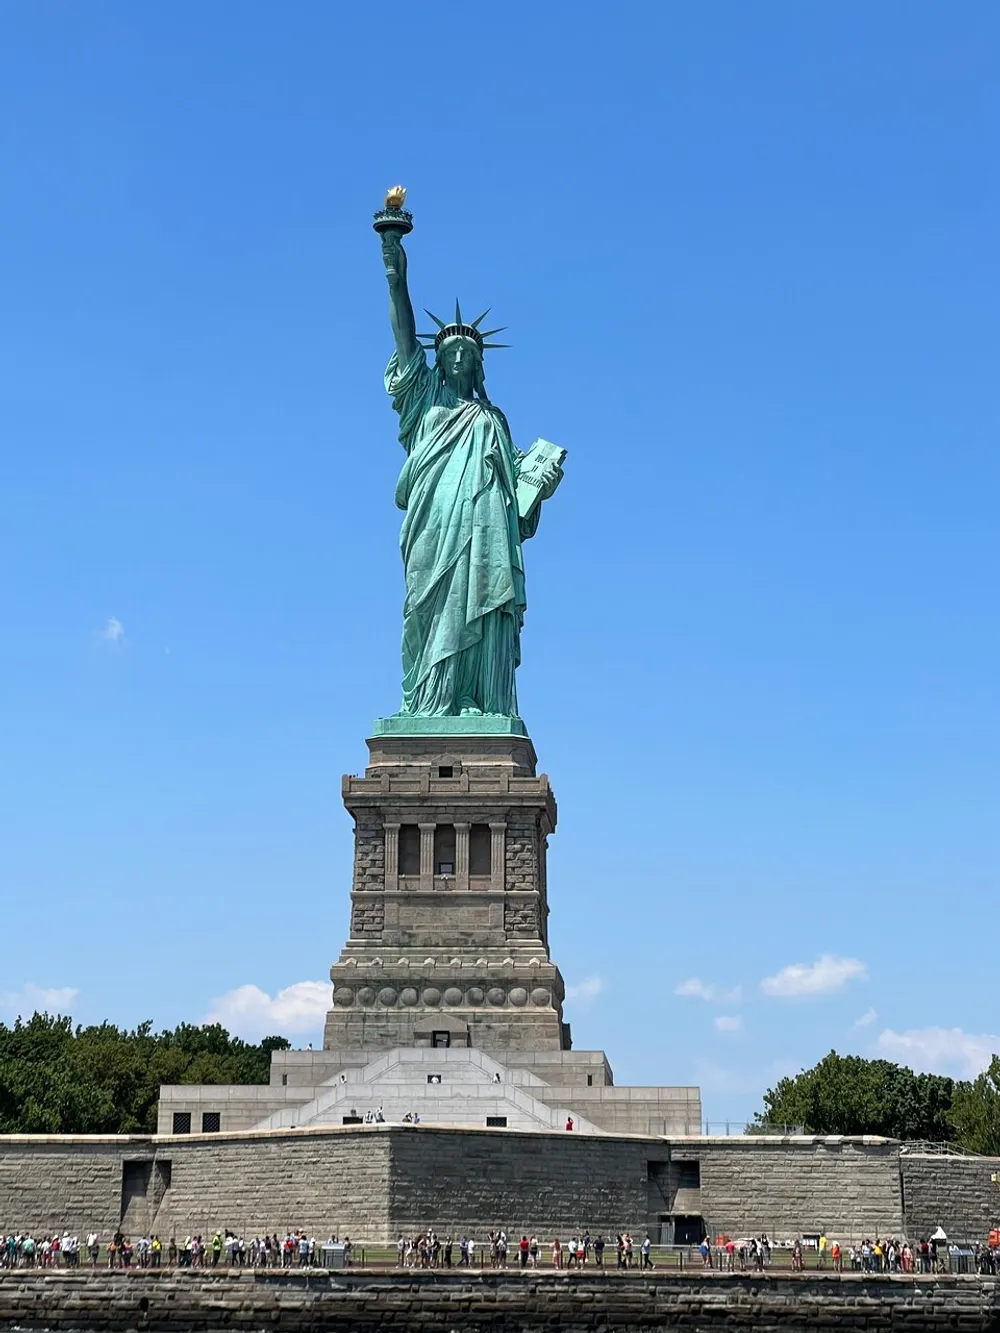 The image shows a full view of the Statue of Liberty against a clear blue sky with visitors visible at its base on Liberty Island